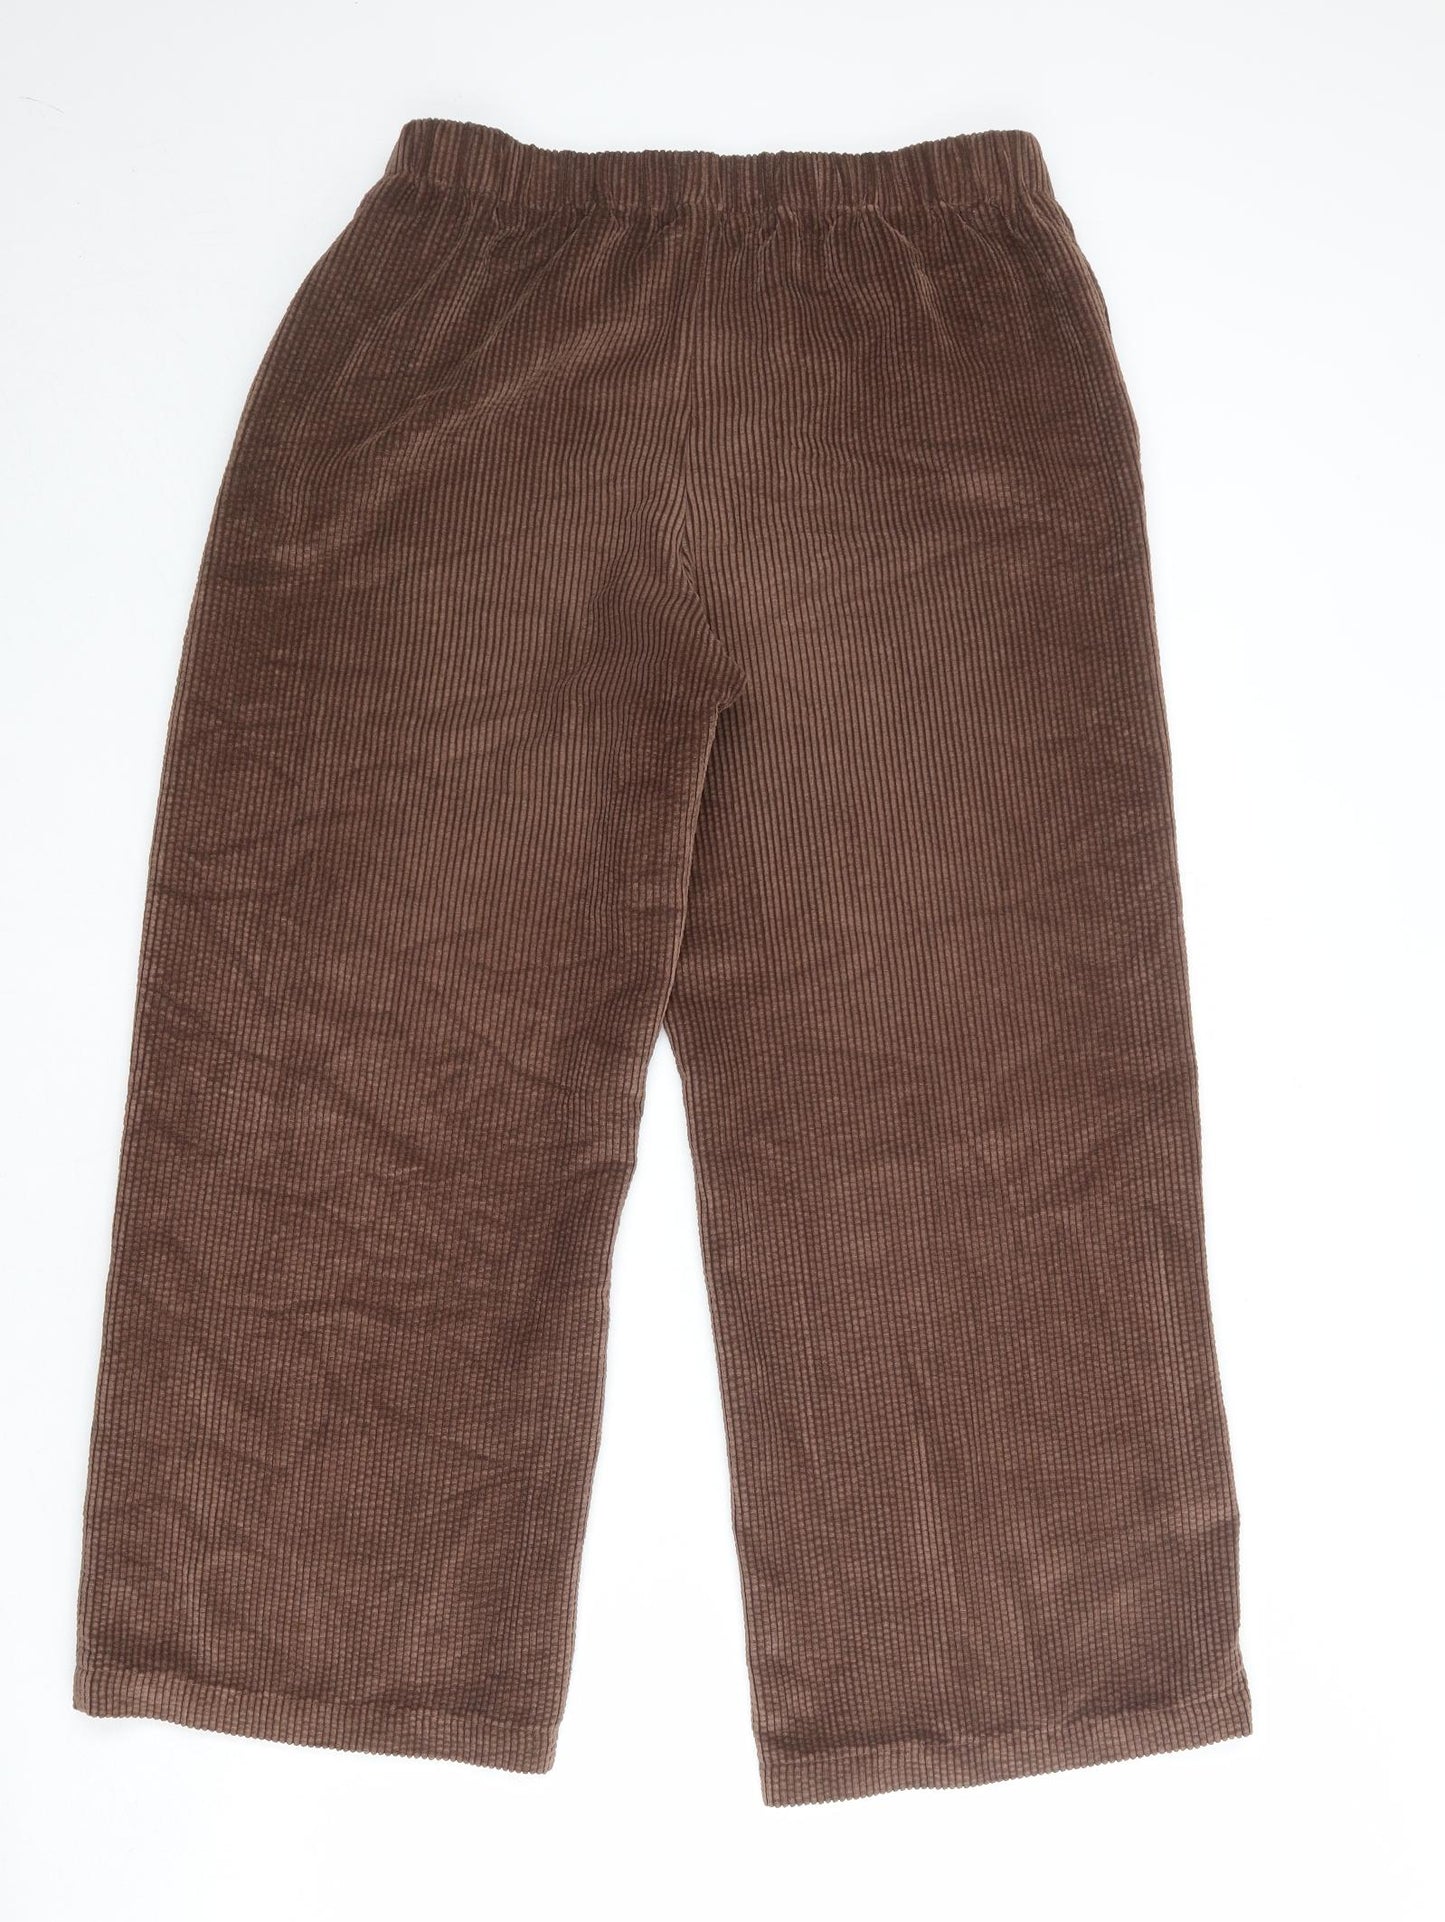 BDG Womens Brown Polyester Trousers Size L Regular